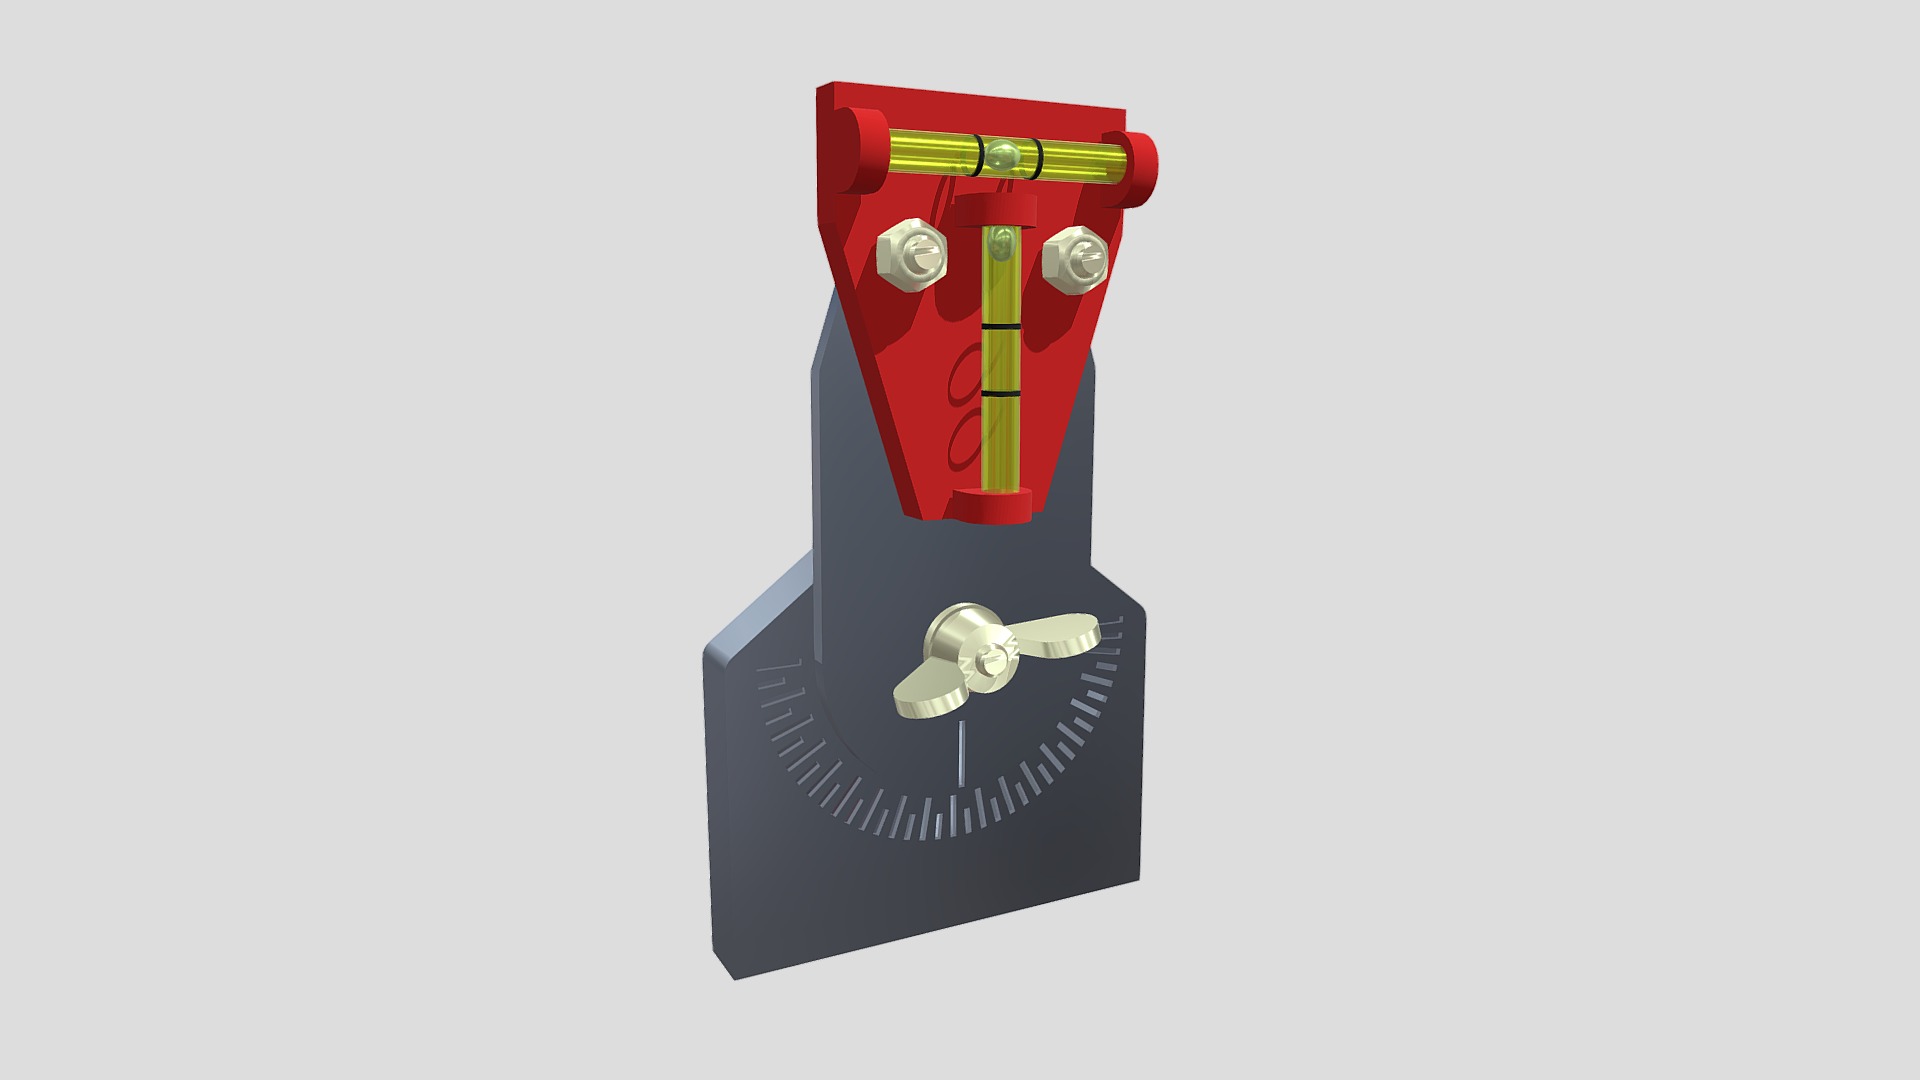 3D model Angle Finder/ spirit level - This is a 3D model of the Angle Finder/ spirit level. The 3D model is about a red and black box.